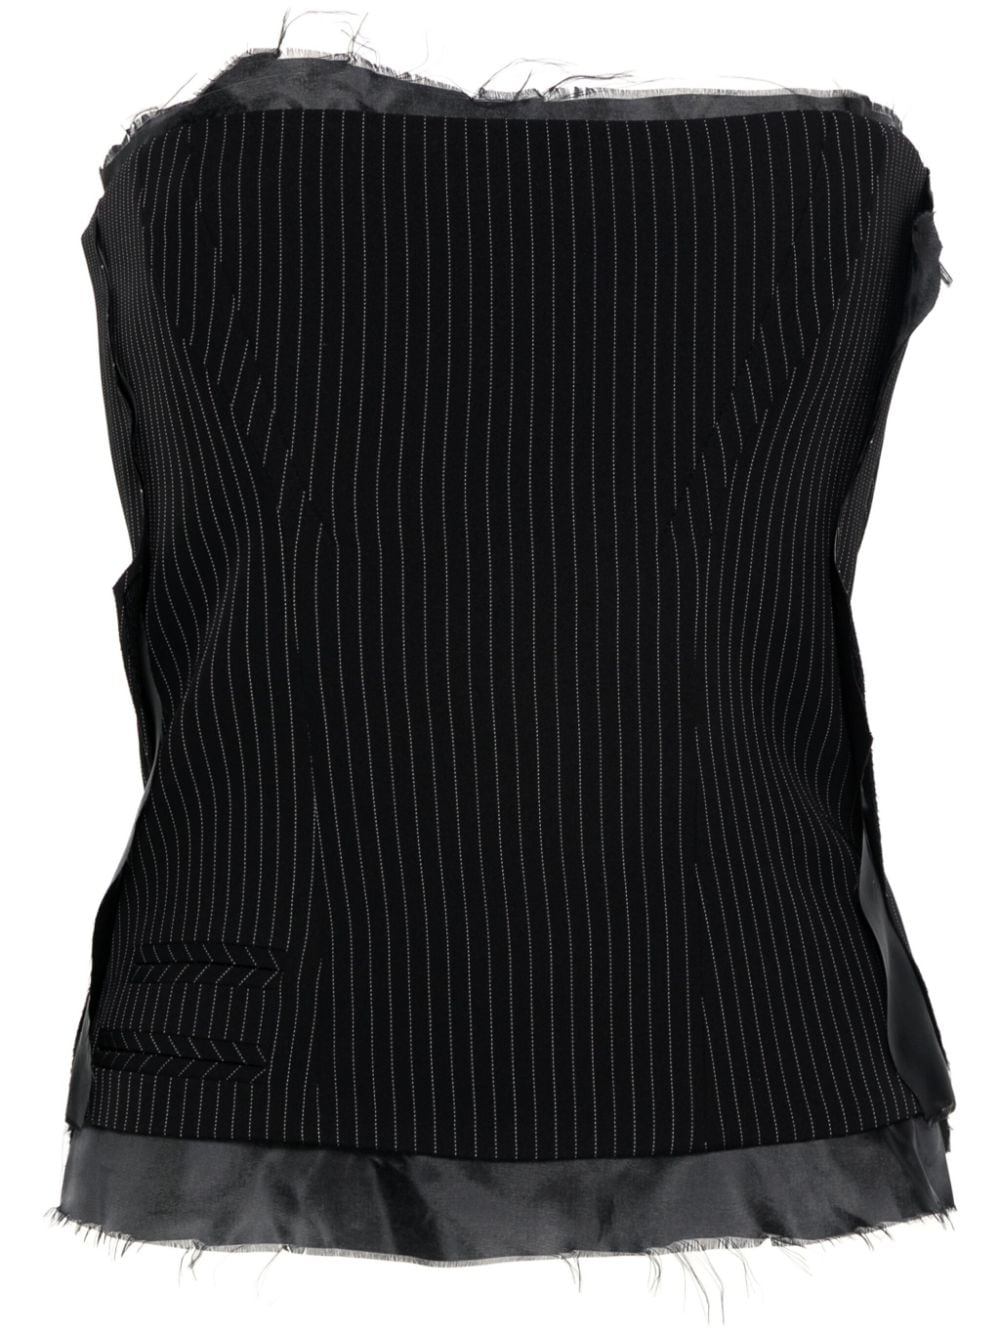 pinstriped deconstructed corset top